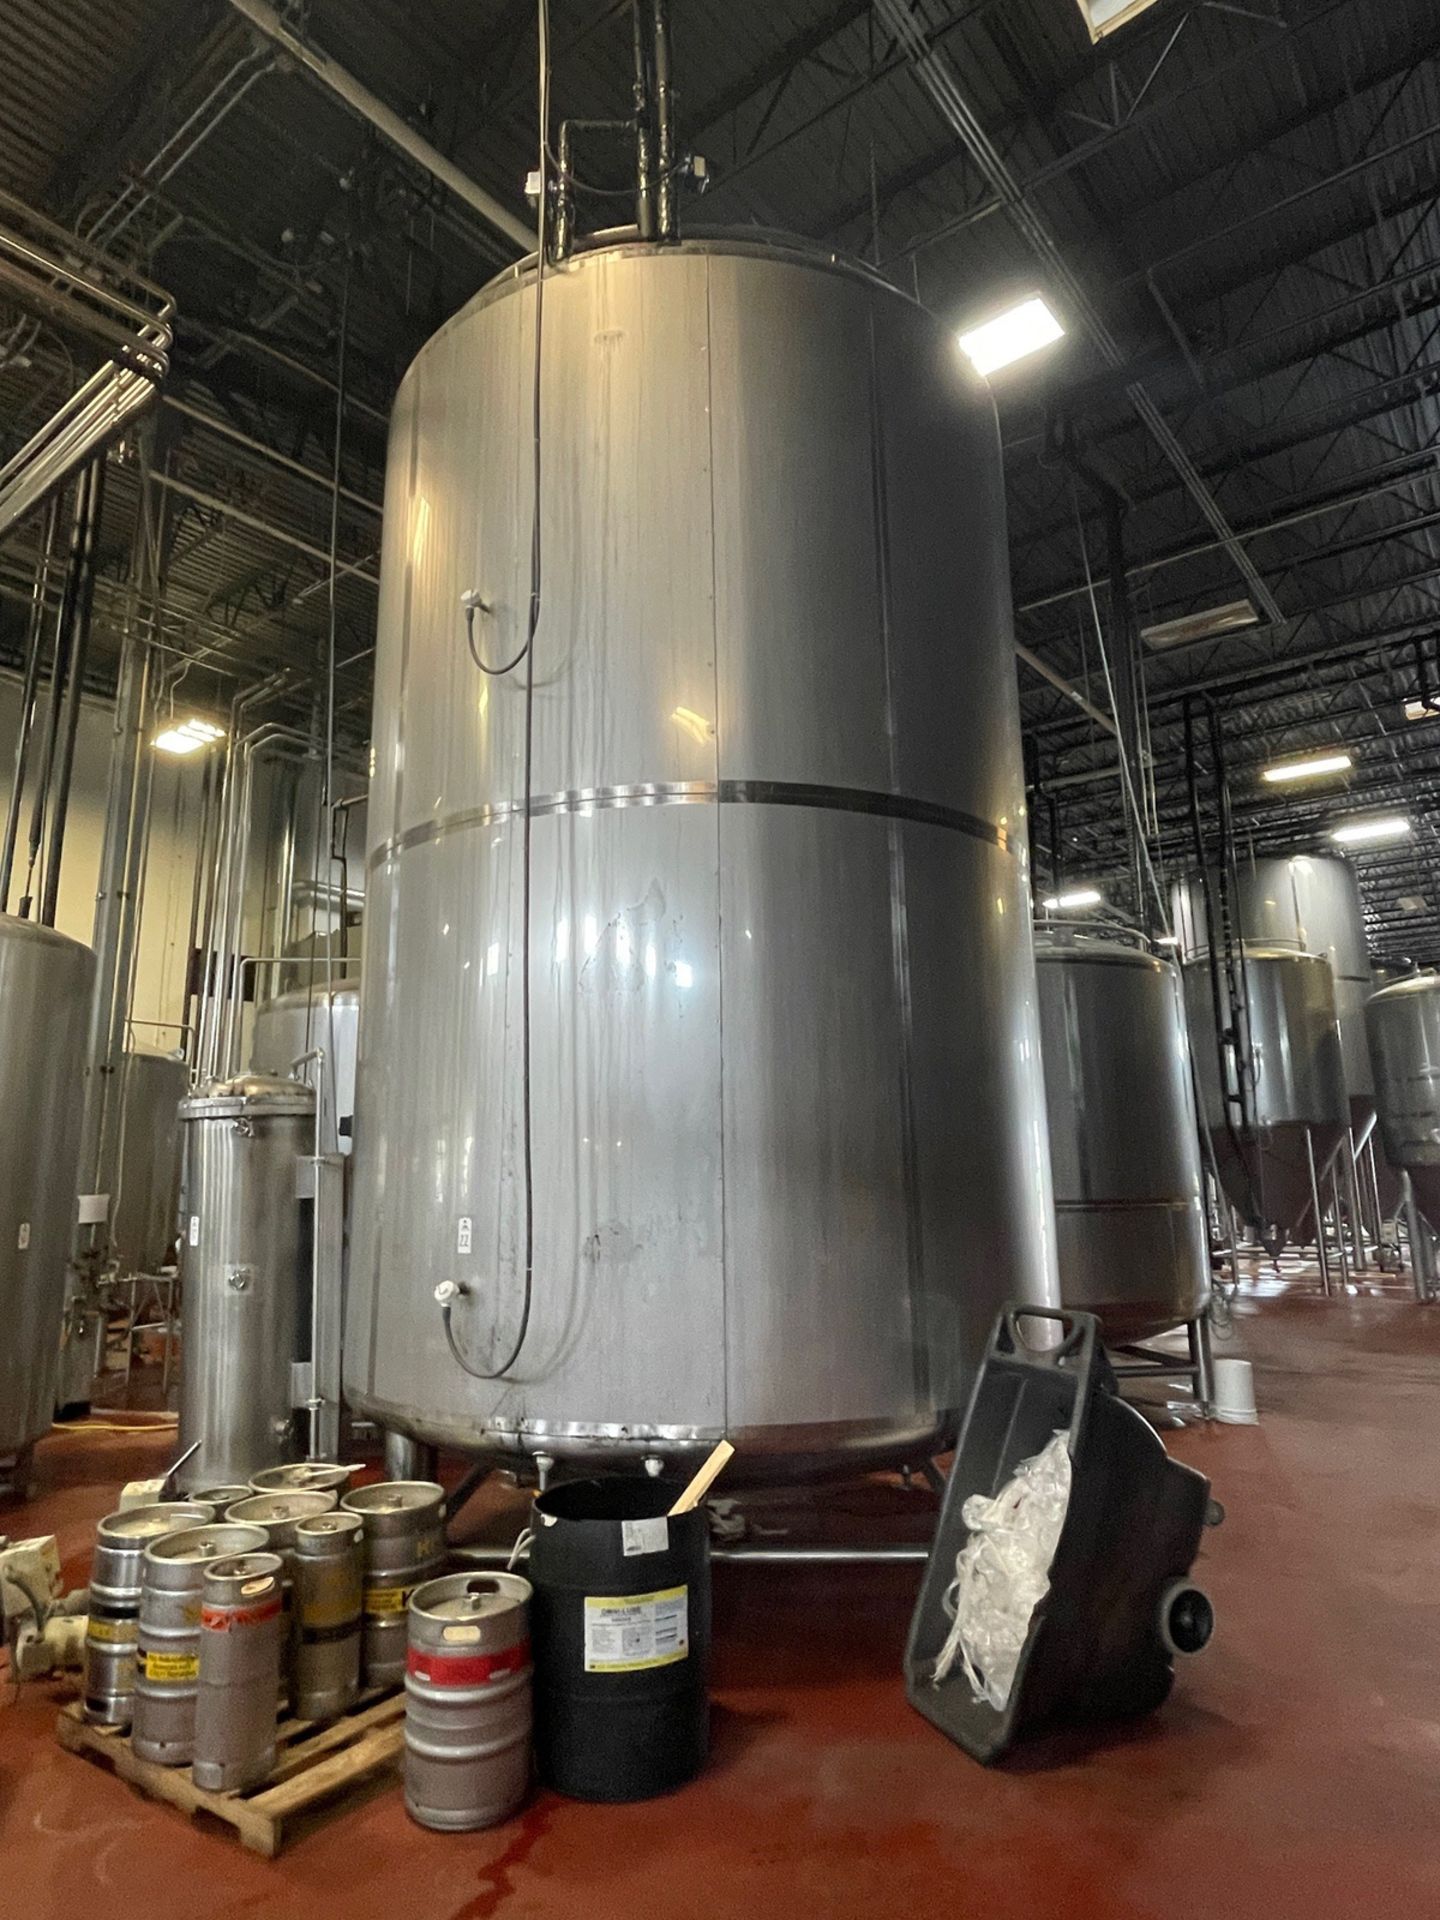 Quality Tank 400 BBL Stainless Steel Holding Tank, Glycol Jacketed, Rounded Bottom, | Rig Fee $6000 - Image 8 of 13